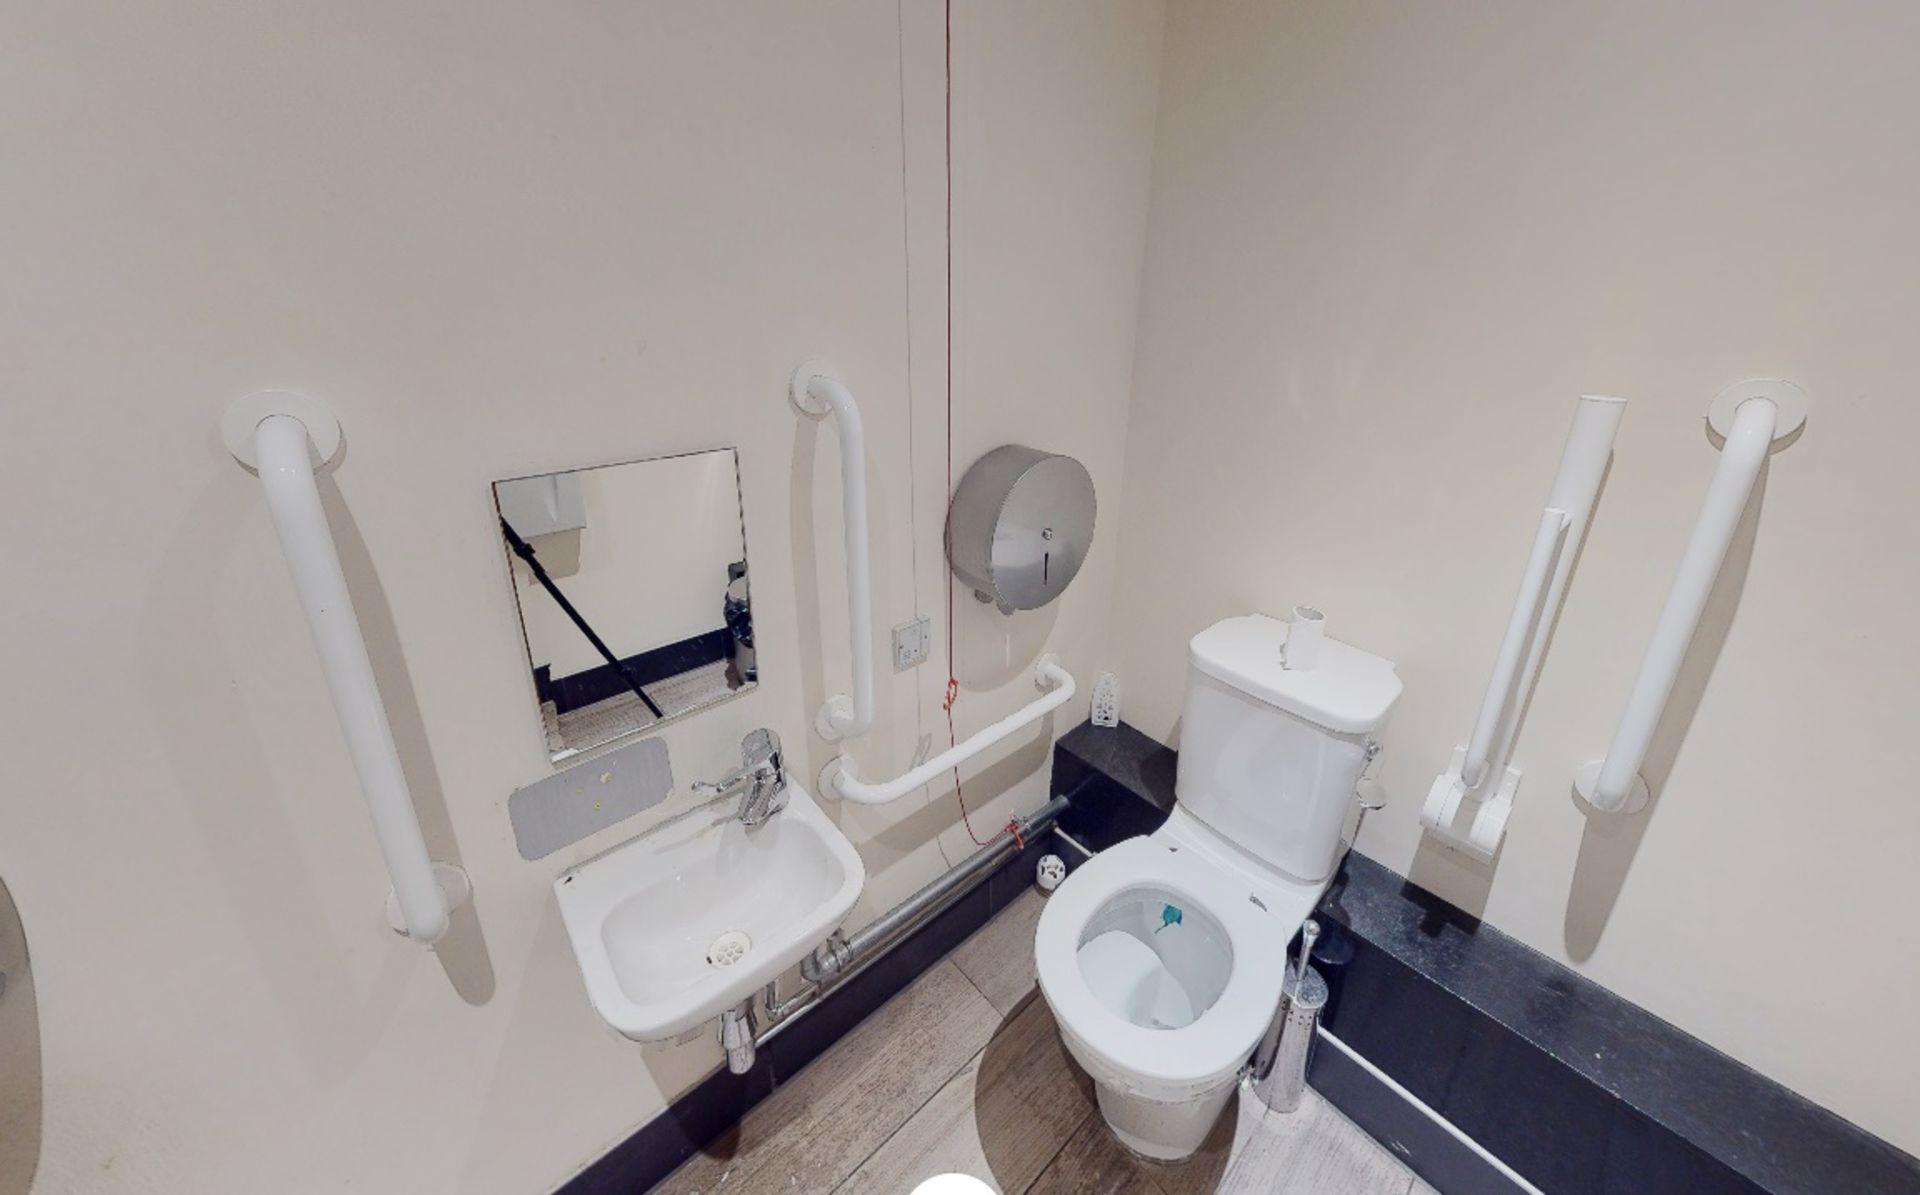 1 x Disabled Toilet Suite - Includes Toilet, Wall Mounted Hand Wash Basin With Mixer Tap, Pedal Bin, - Image 2 of 3